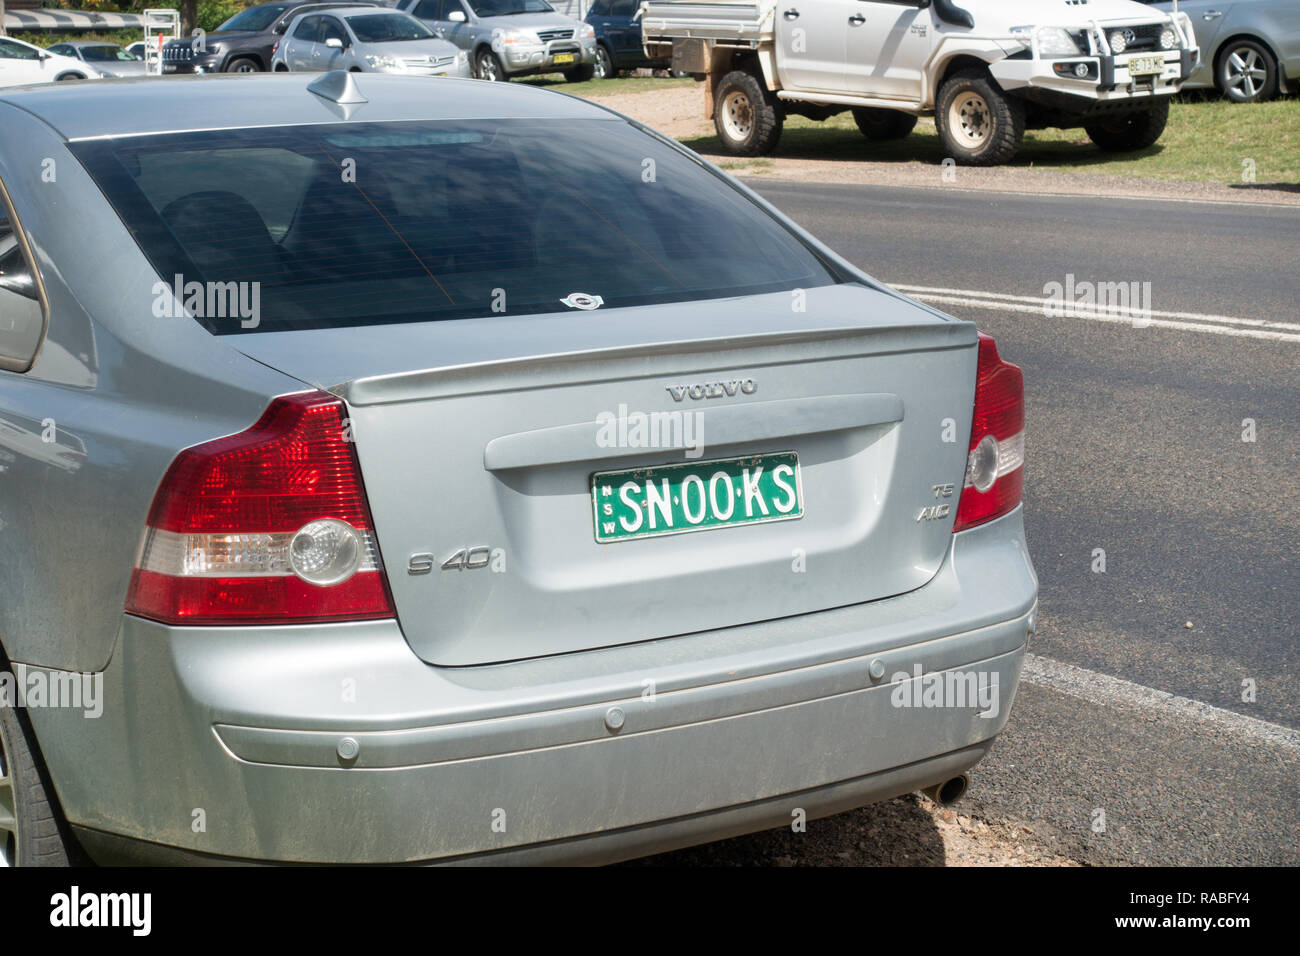 NSW Australia Vehicle license plate spelling SNOOKS on a Volvo S40 car. Stock Photo